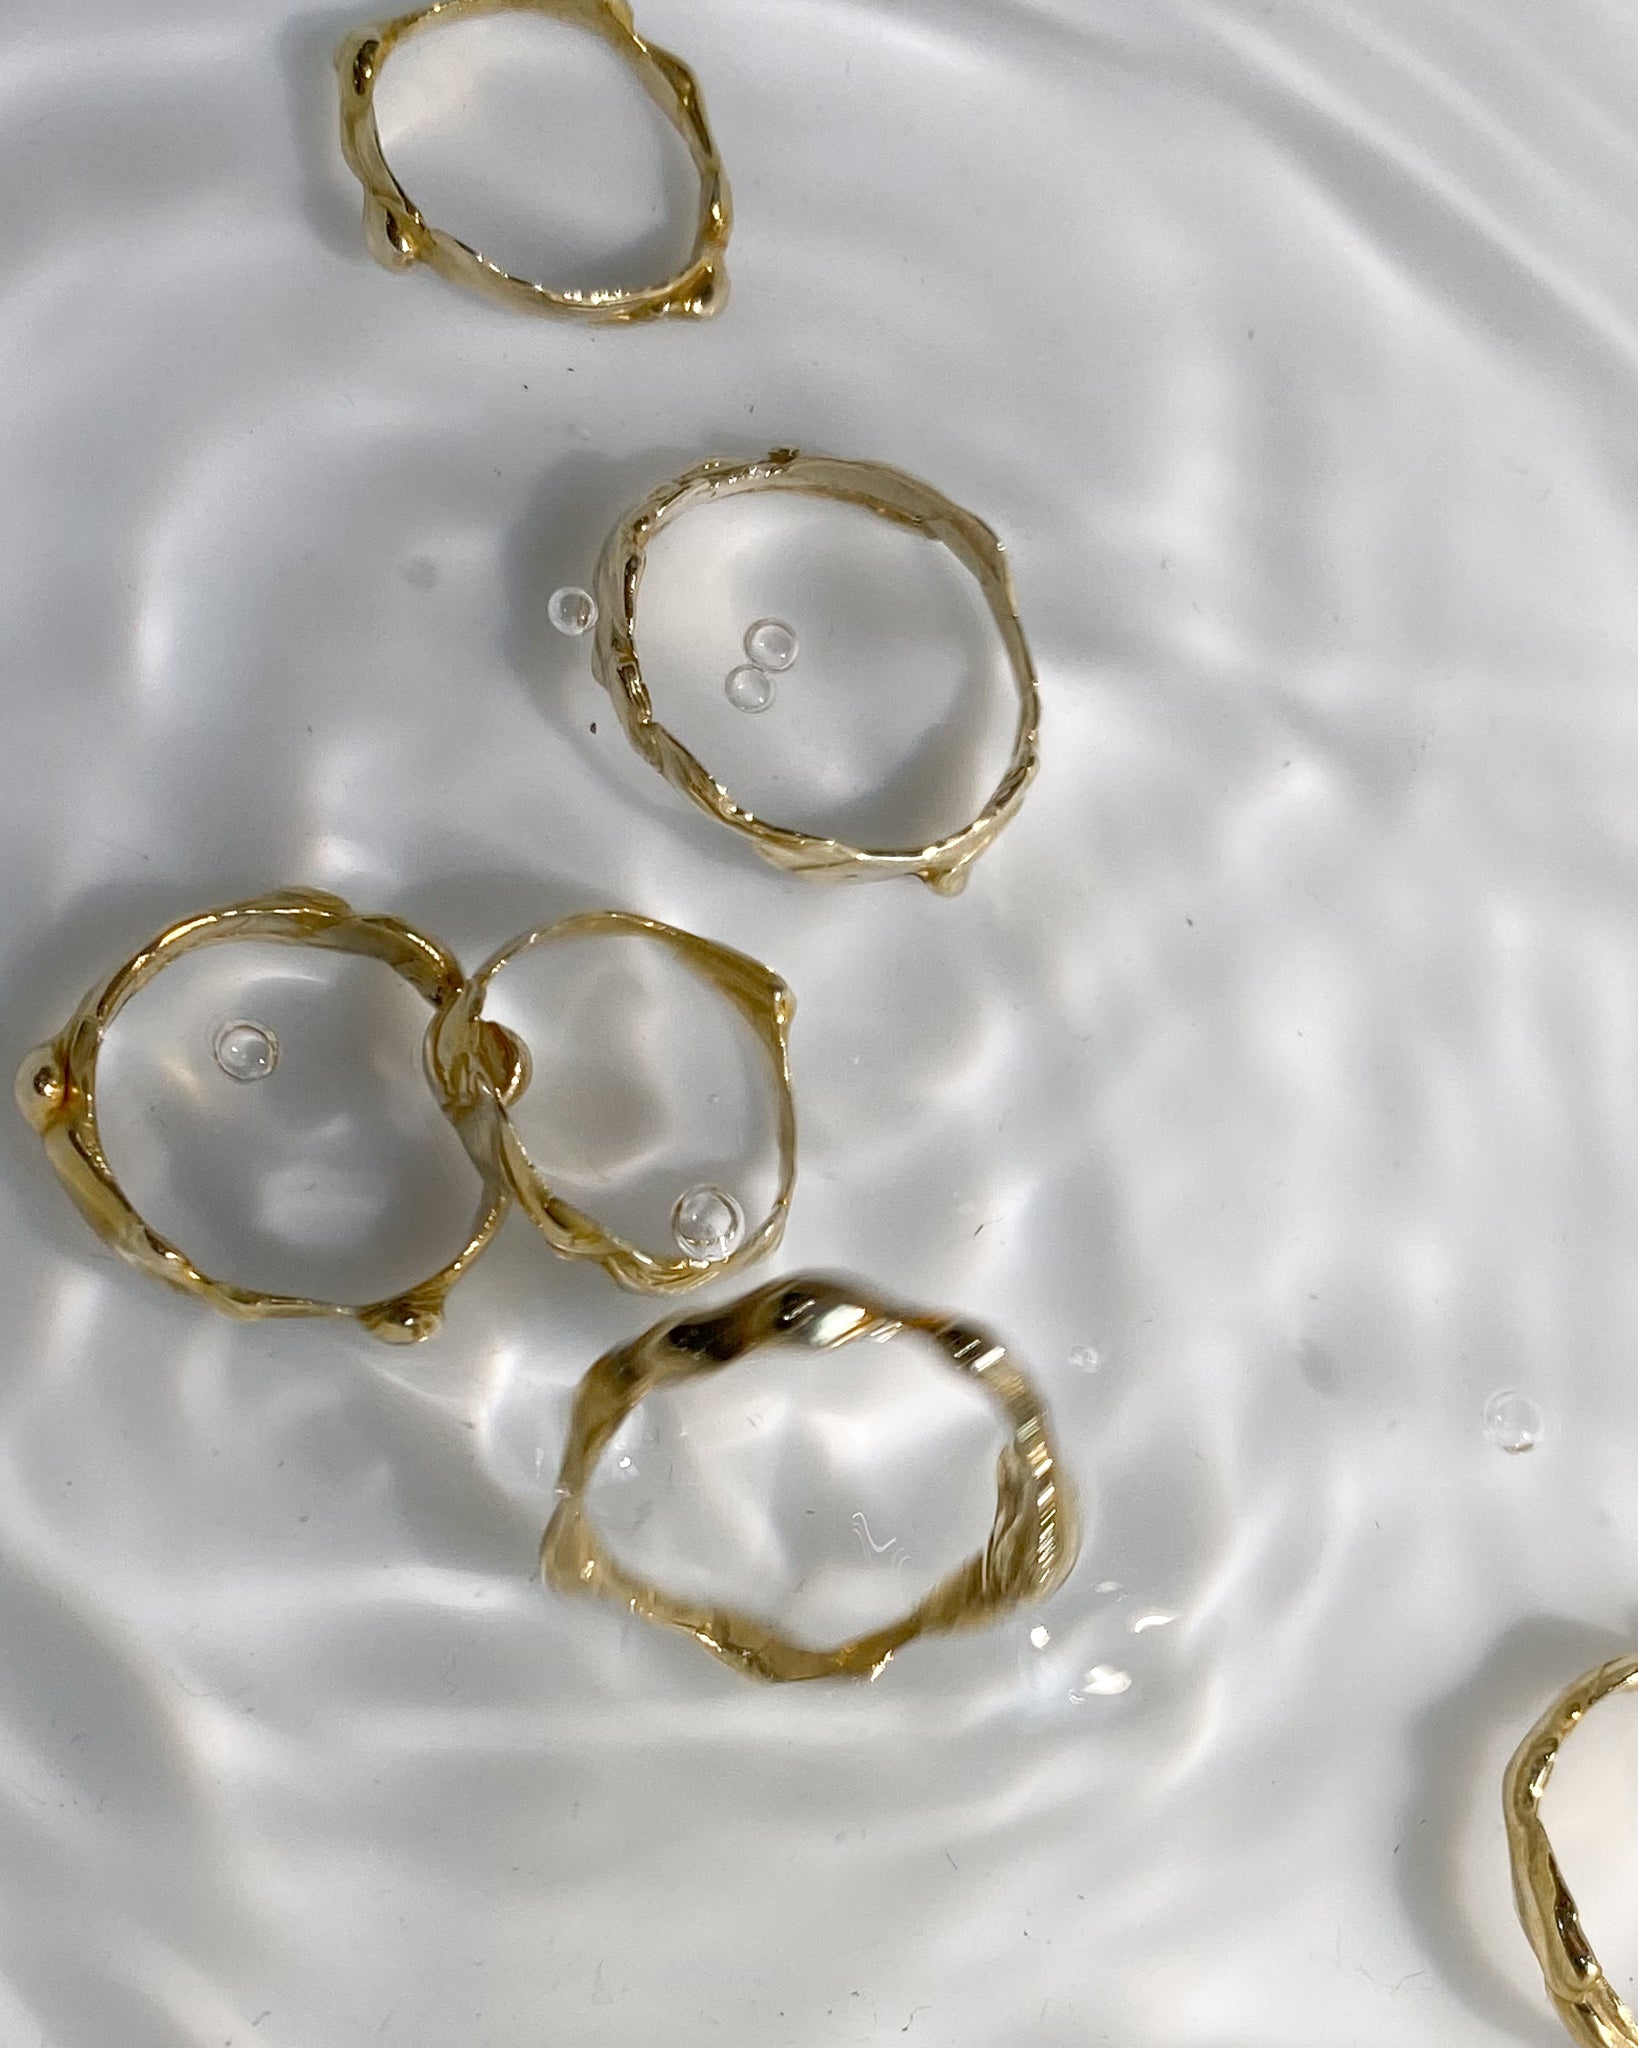 6 molten rings in water